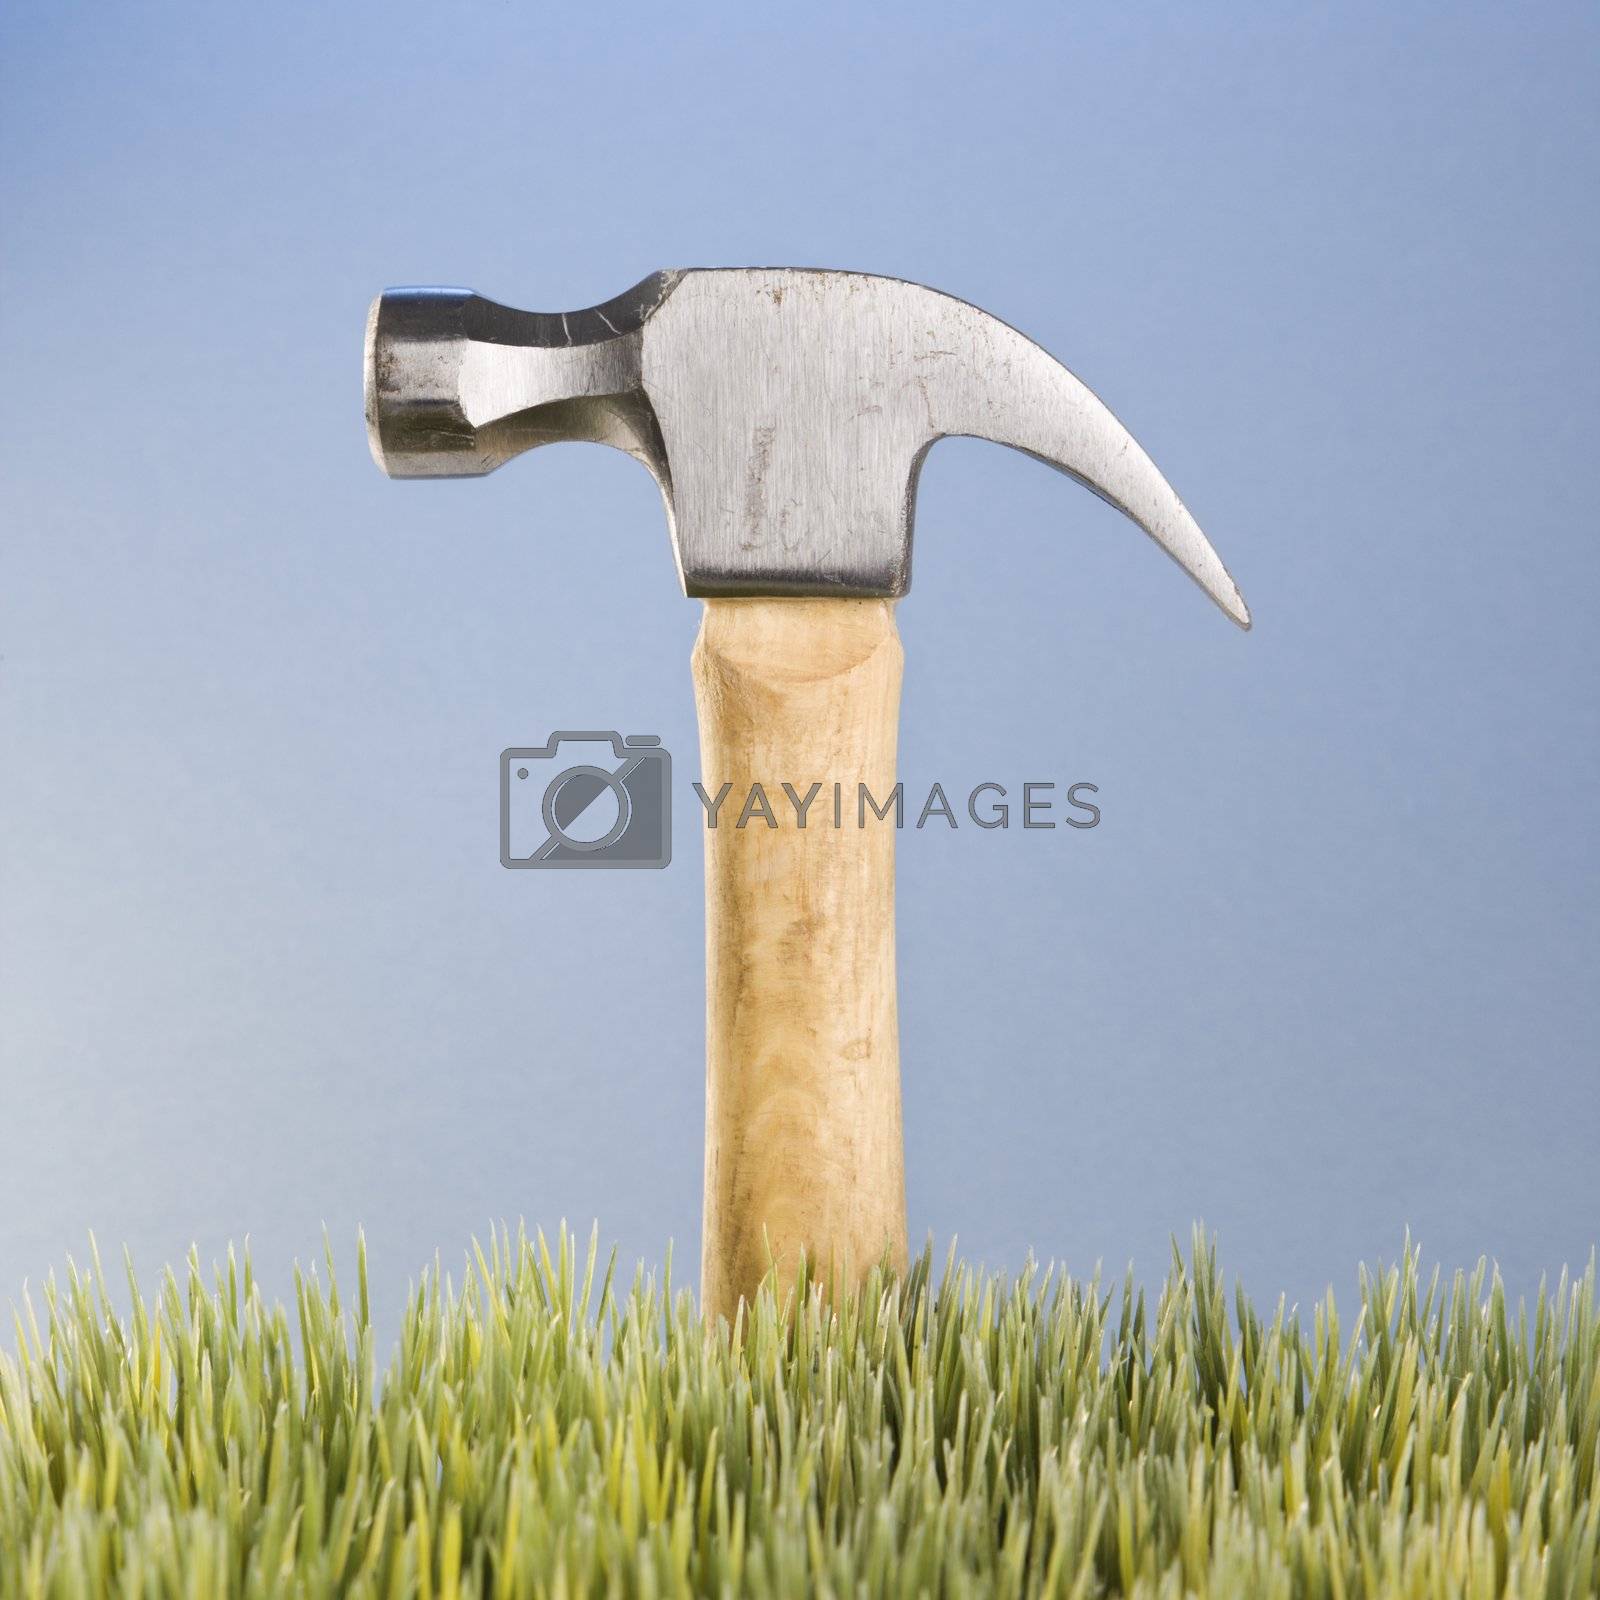 Royalty free image of Hammer in grass. by iofoto